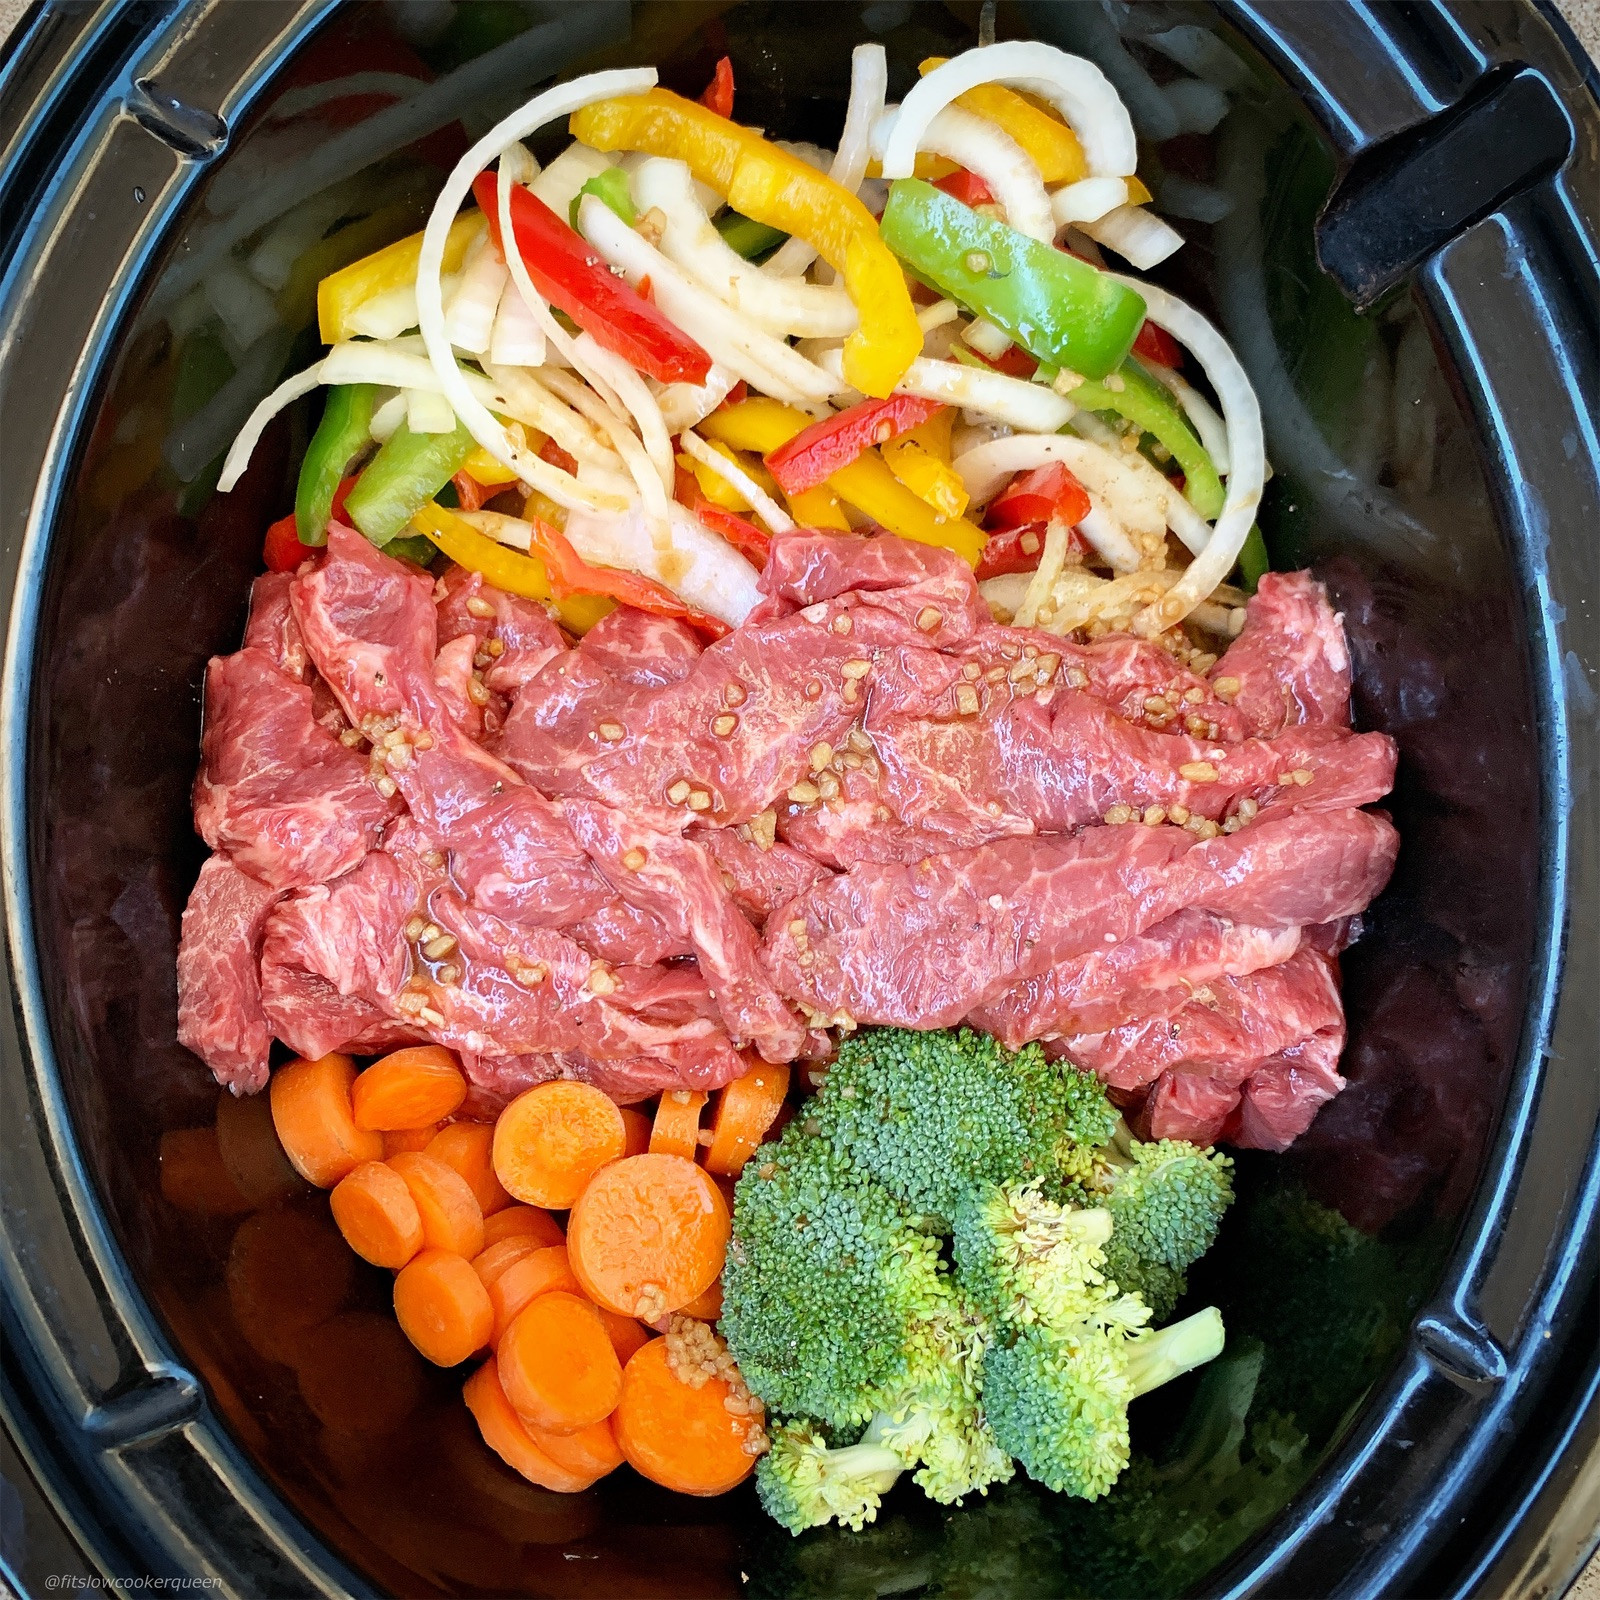 Instant Pot Slow Cooker Recipes Luxury Healthy Beef Stir Fry Made In the Slow Cooker or Instant